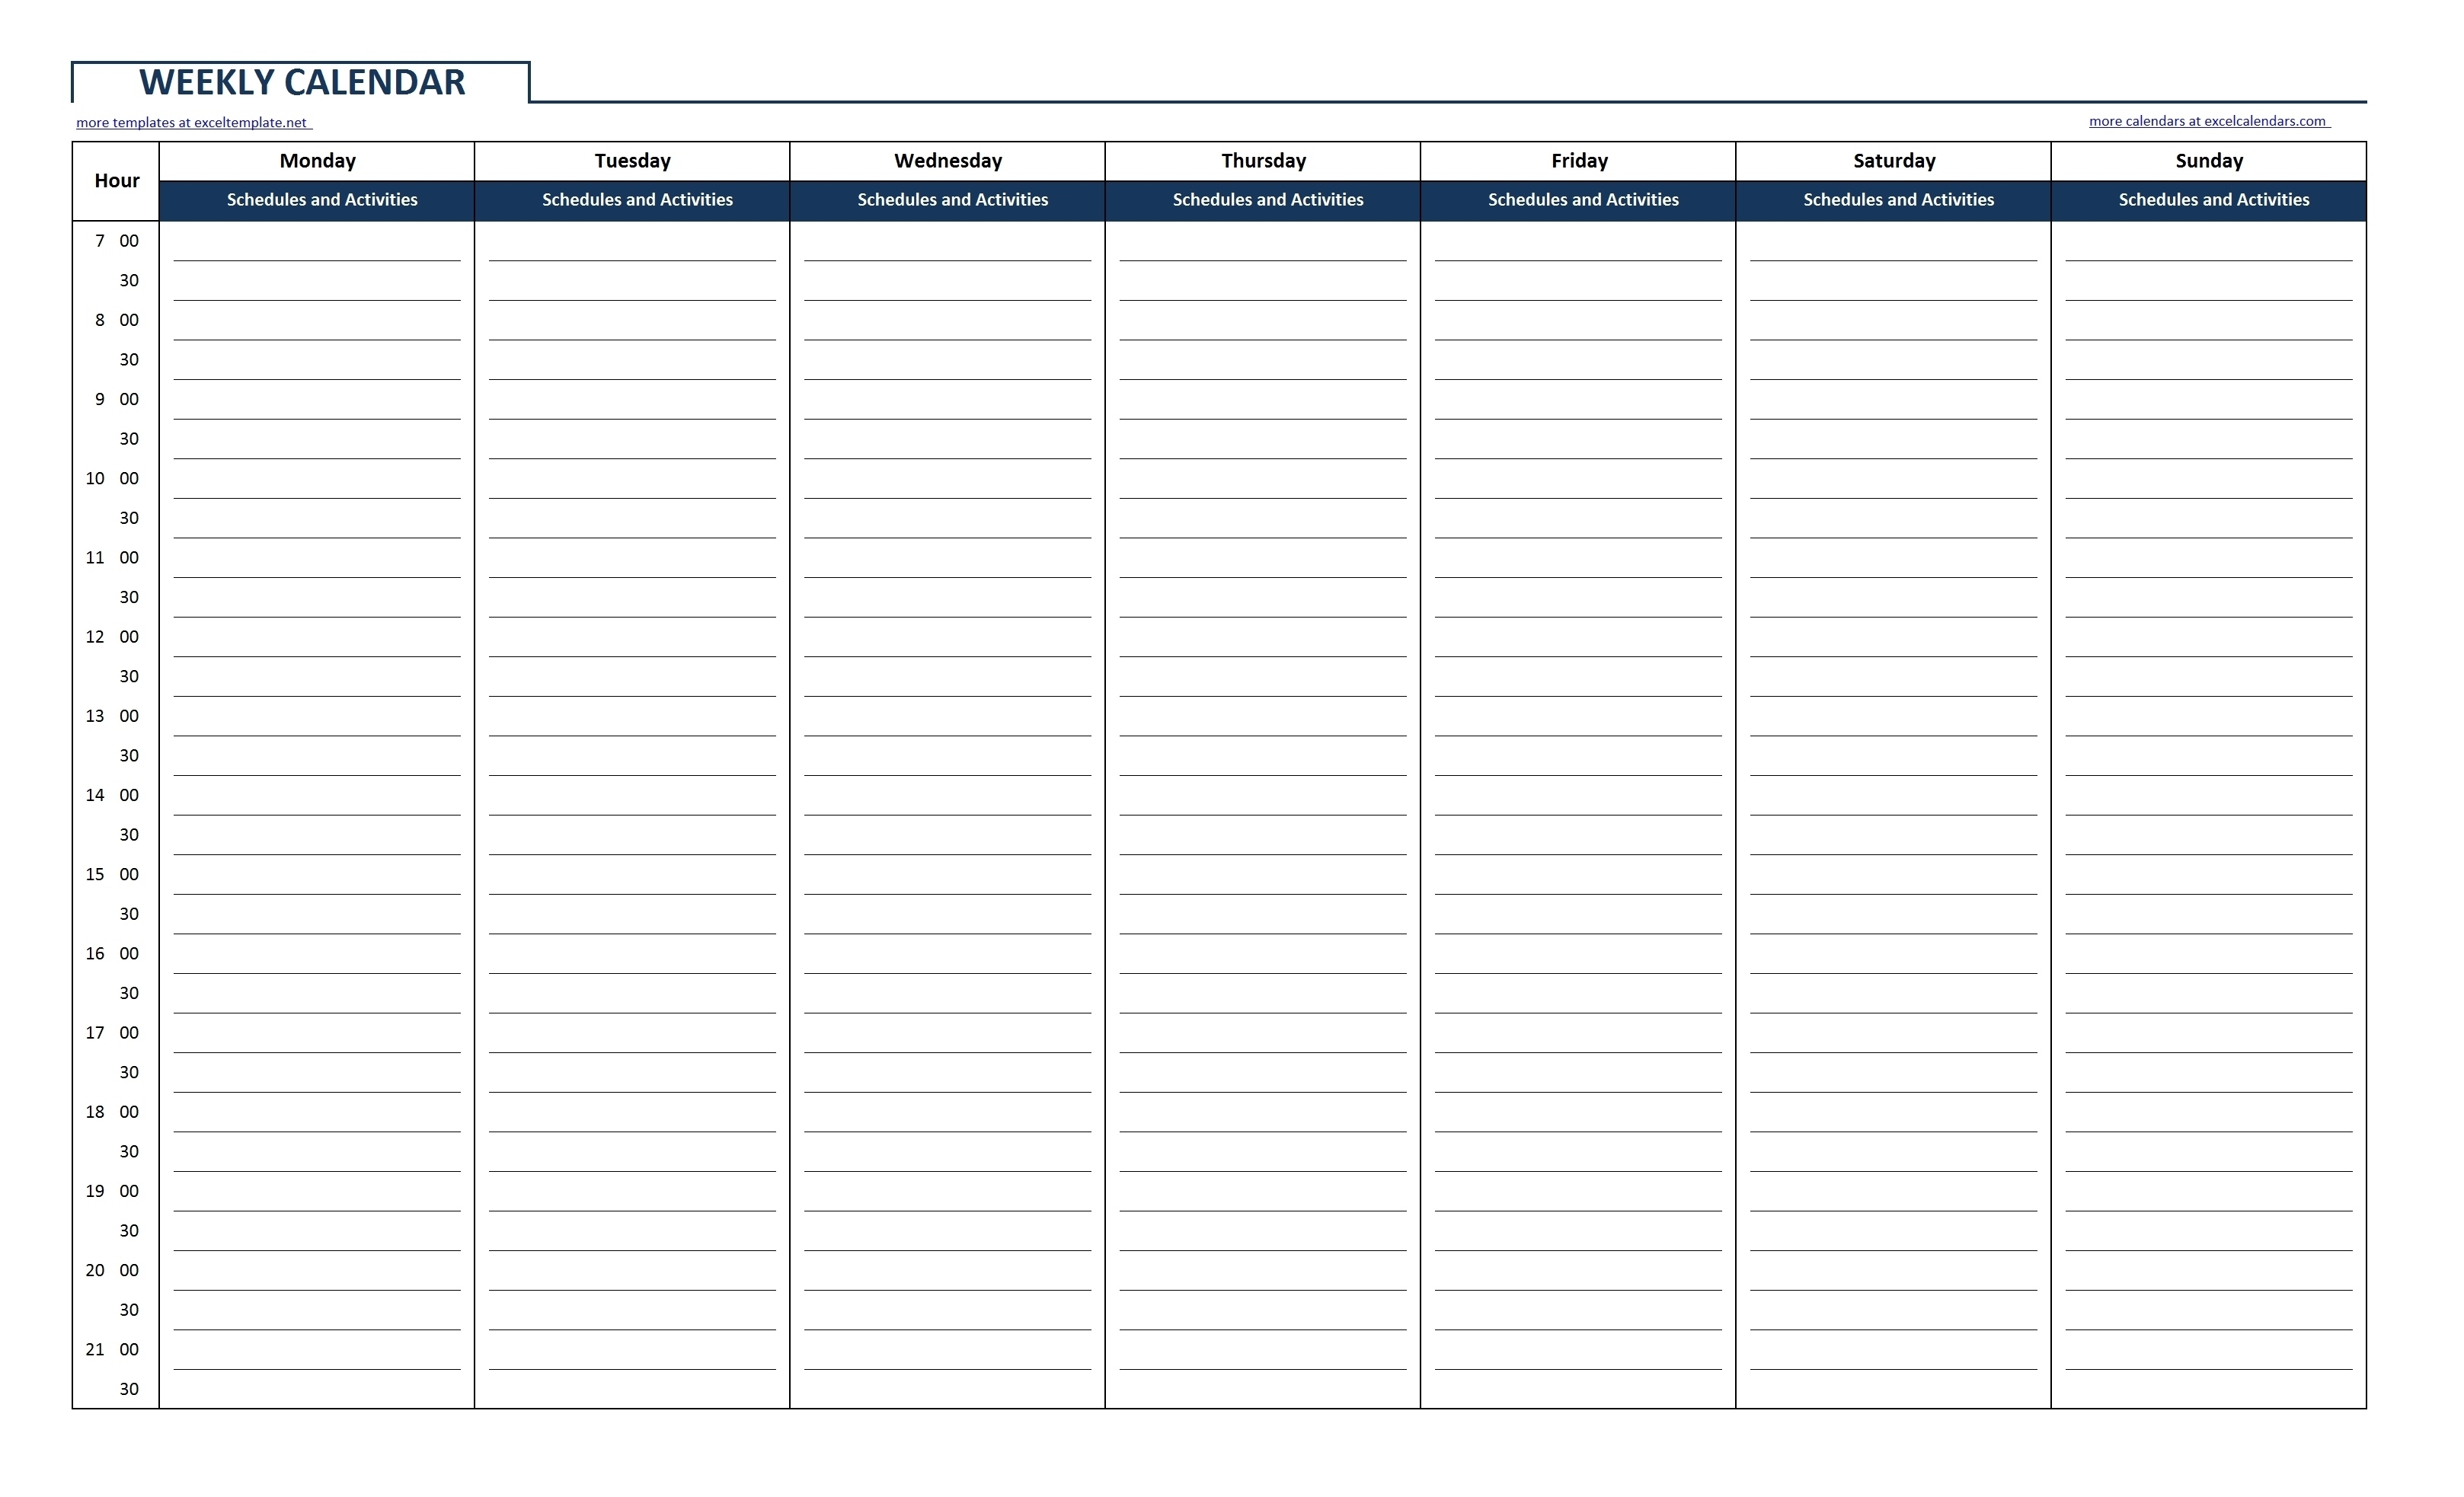 Blank Daily Schedule With Time Slots | Calendar Printing Example Monthly Calendar With Time Slots